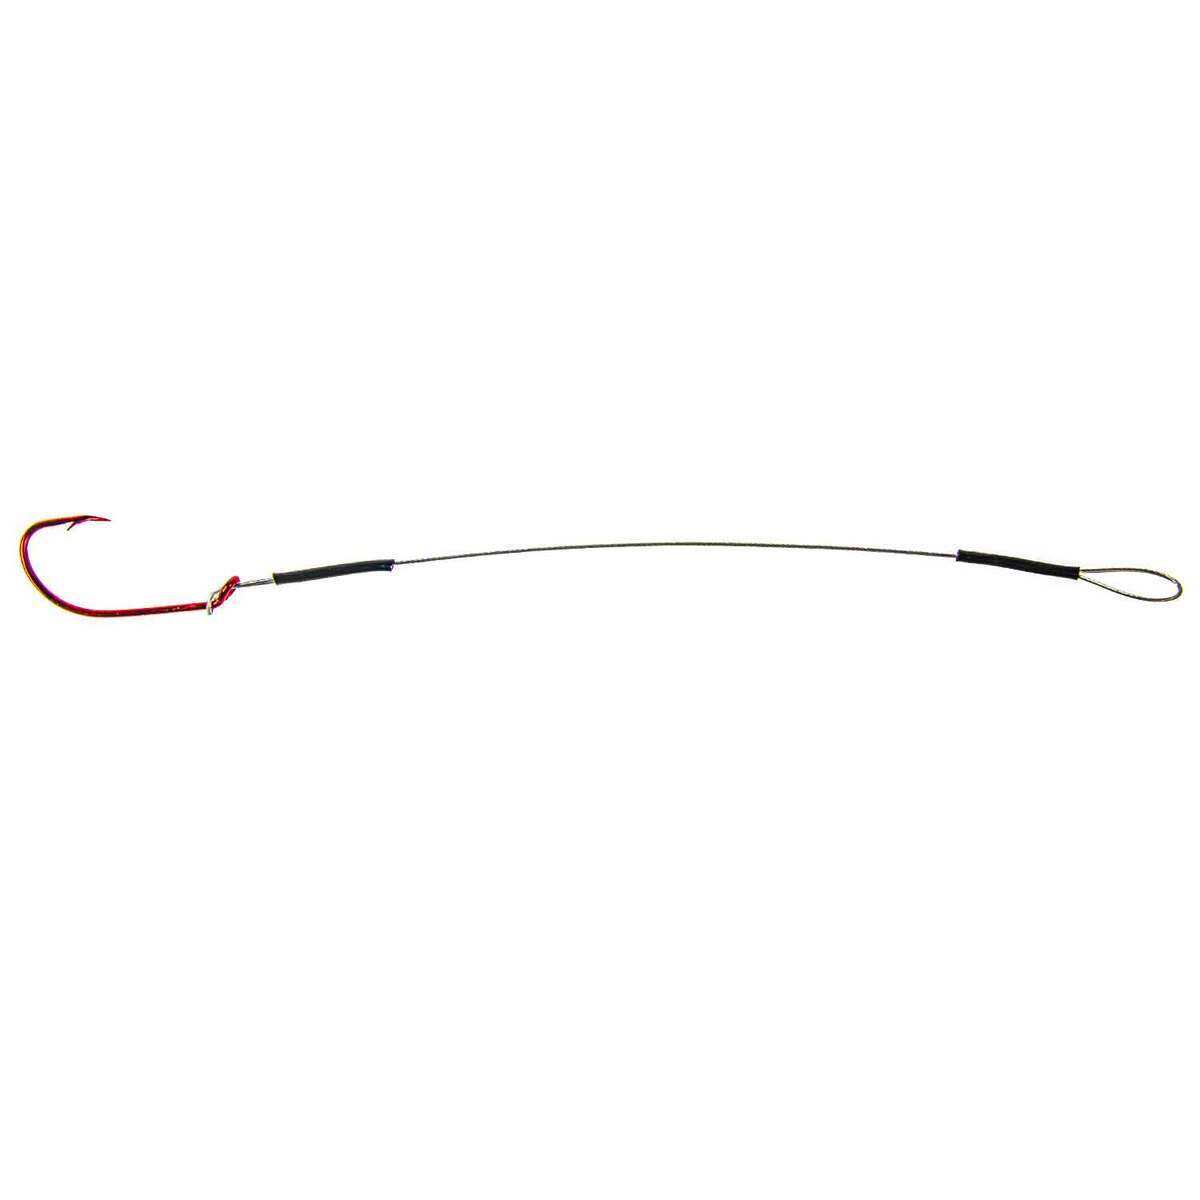 Eagle Claw Nylawire Snelled Hook - Red, 2/0